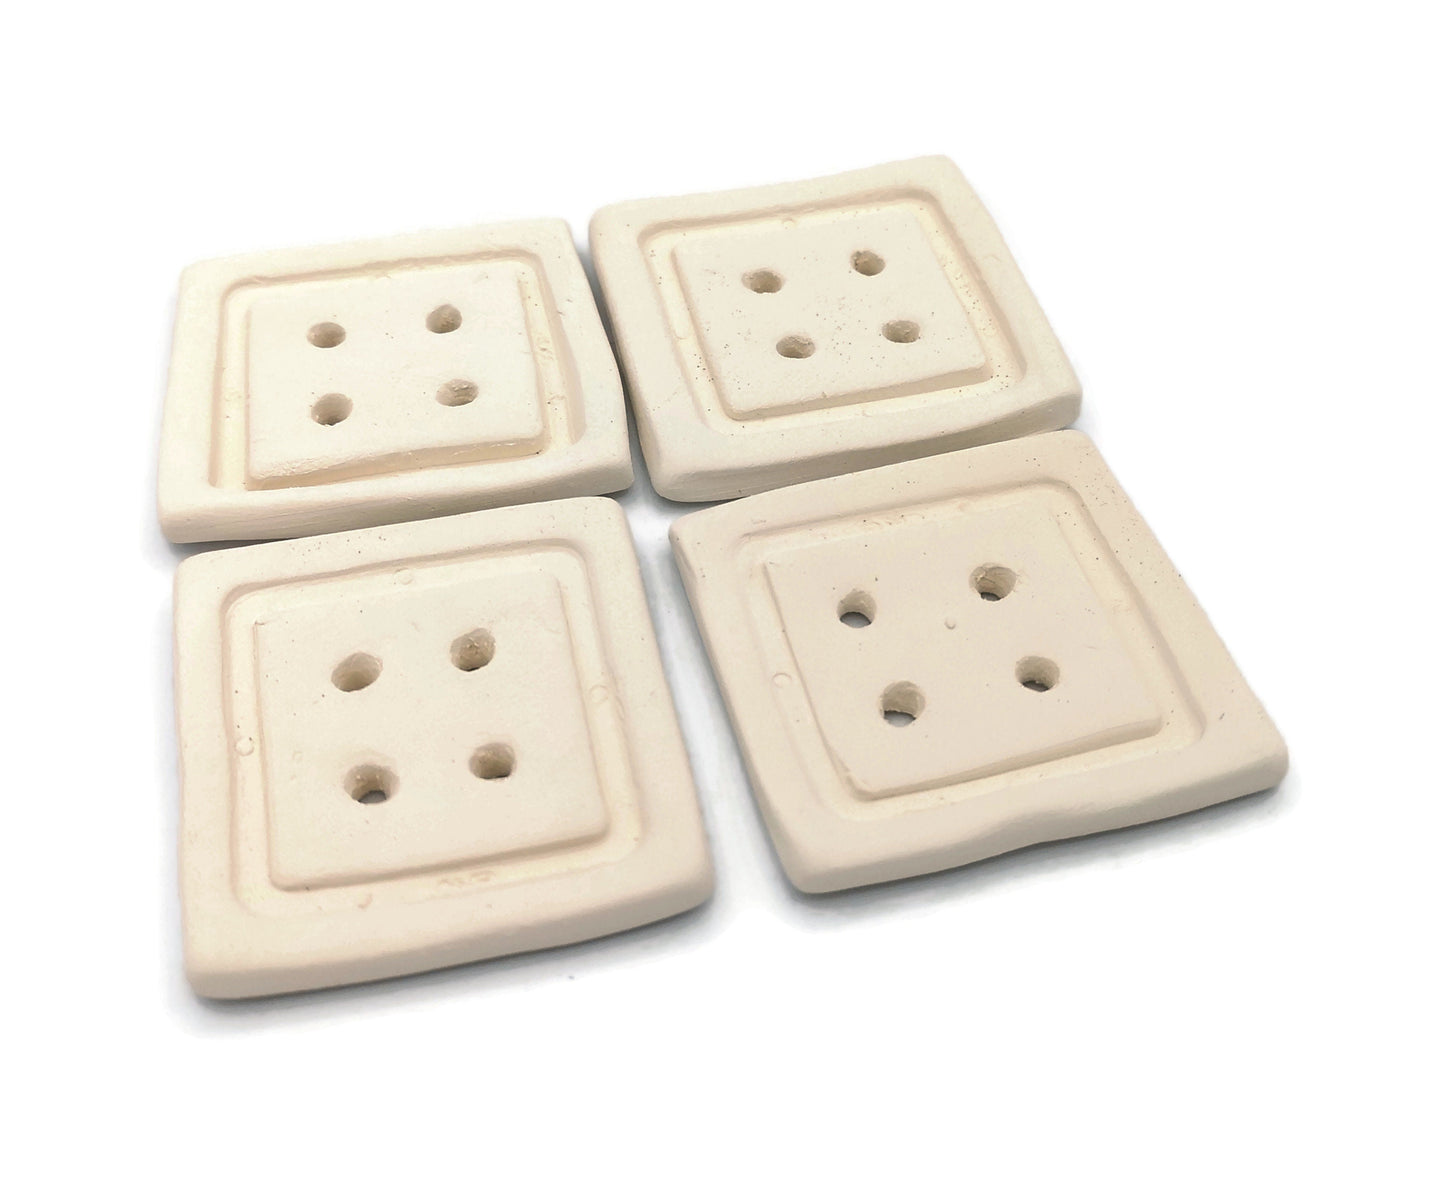 4Pc Customizable Handmade Ceramic Bisque Sewing Buttons Ready To Paint, Novelty Button For Crafts, Large Square Button - Ceramica Ana Rafael